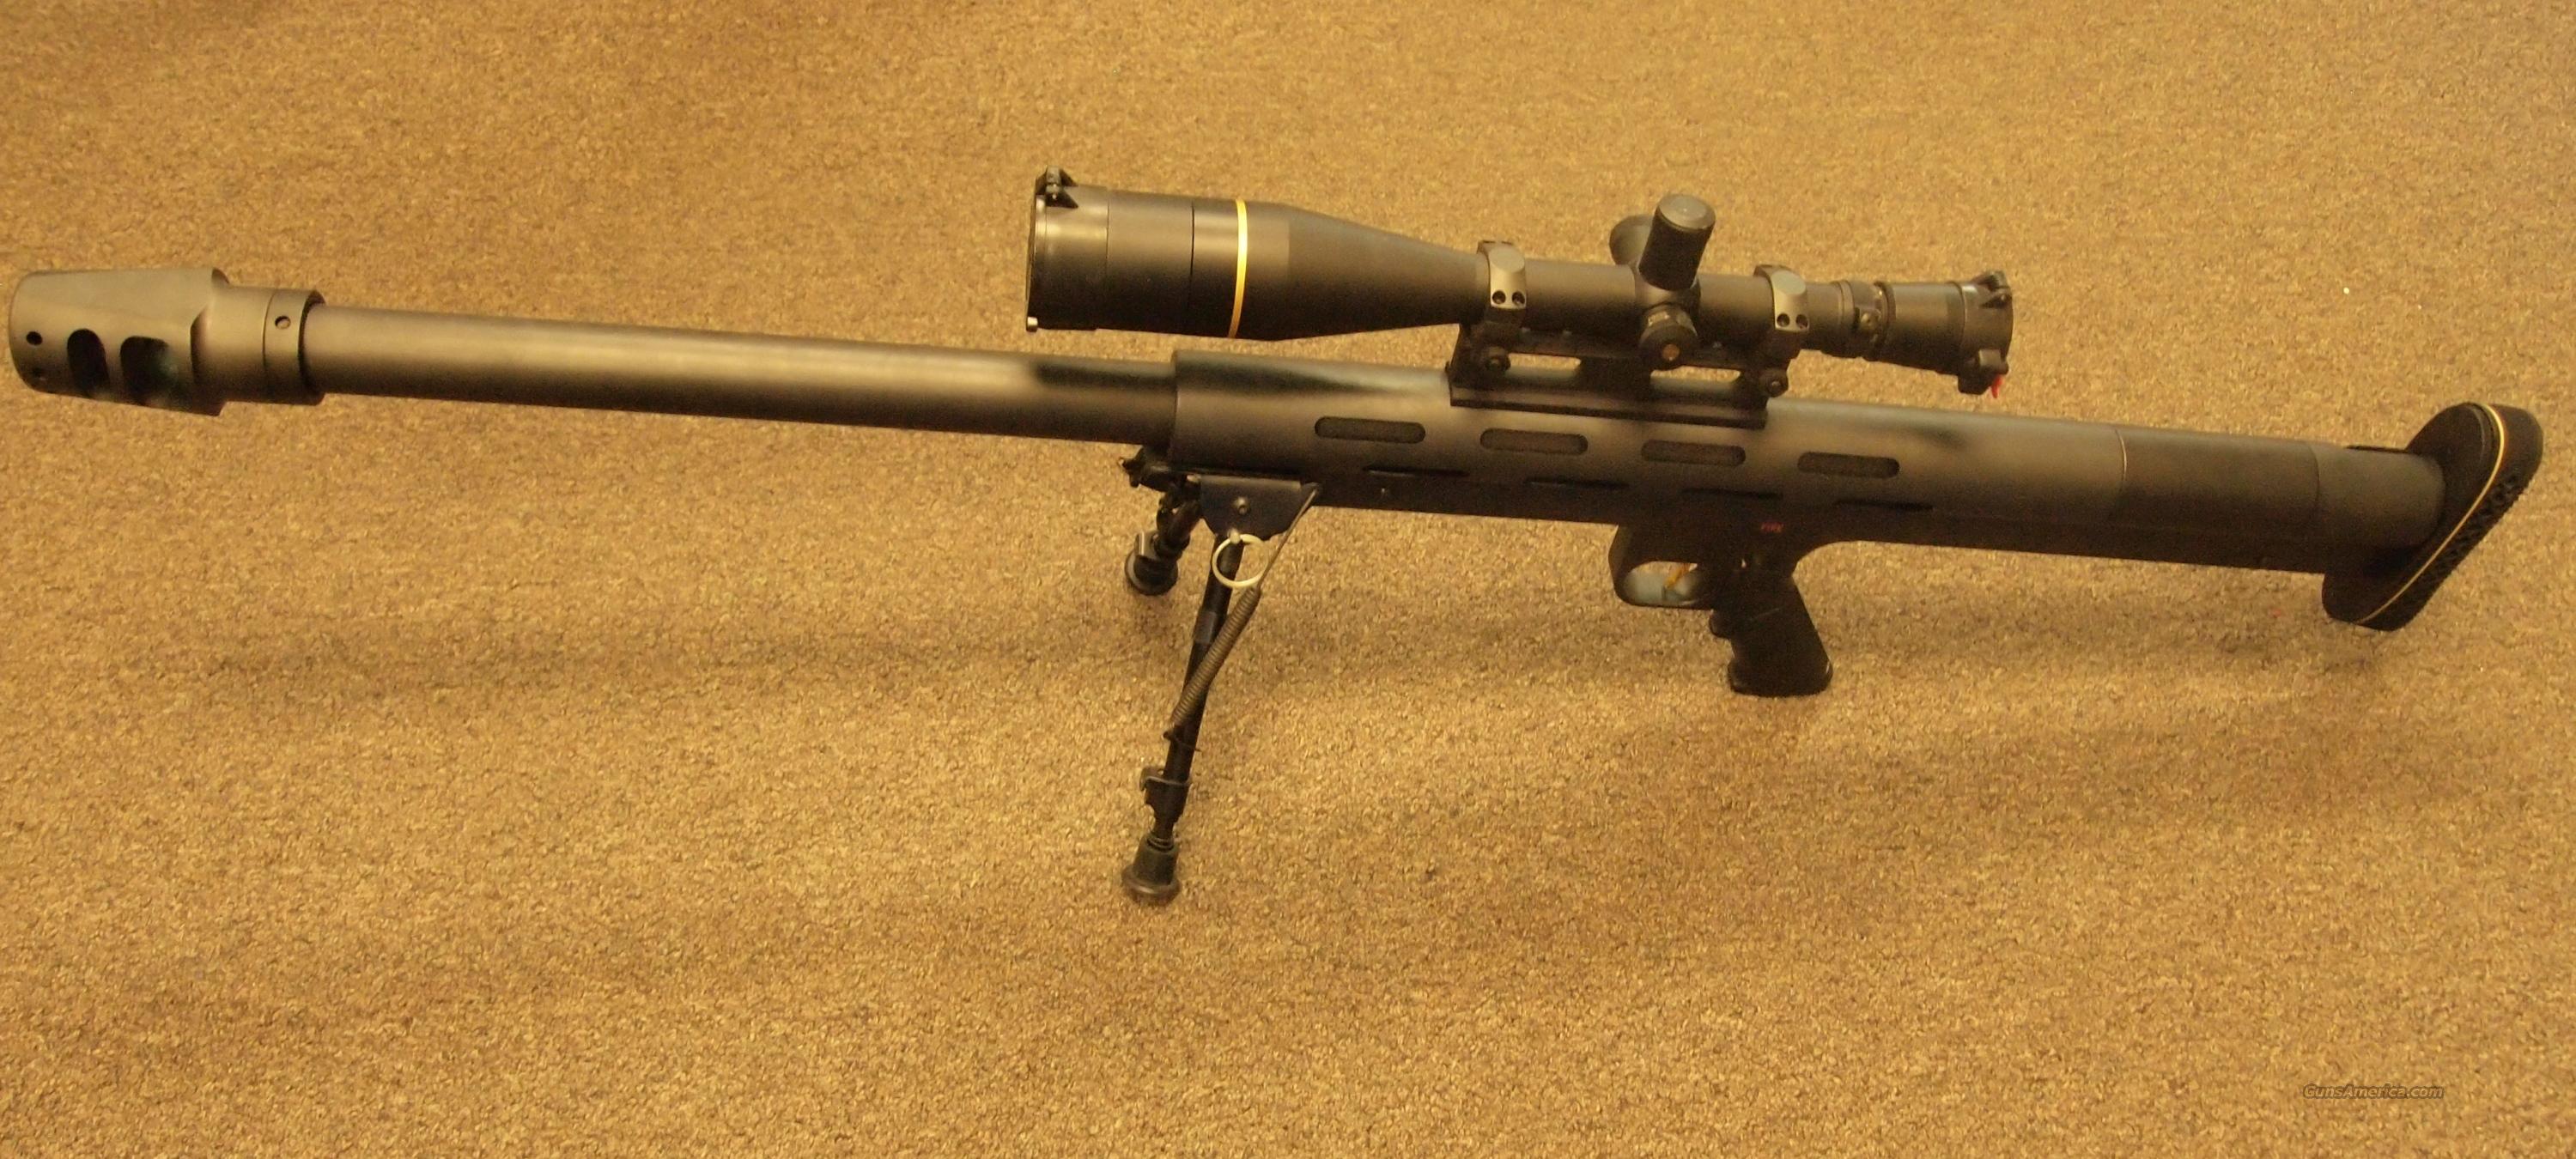 Lar 50 Bmg For Sale